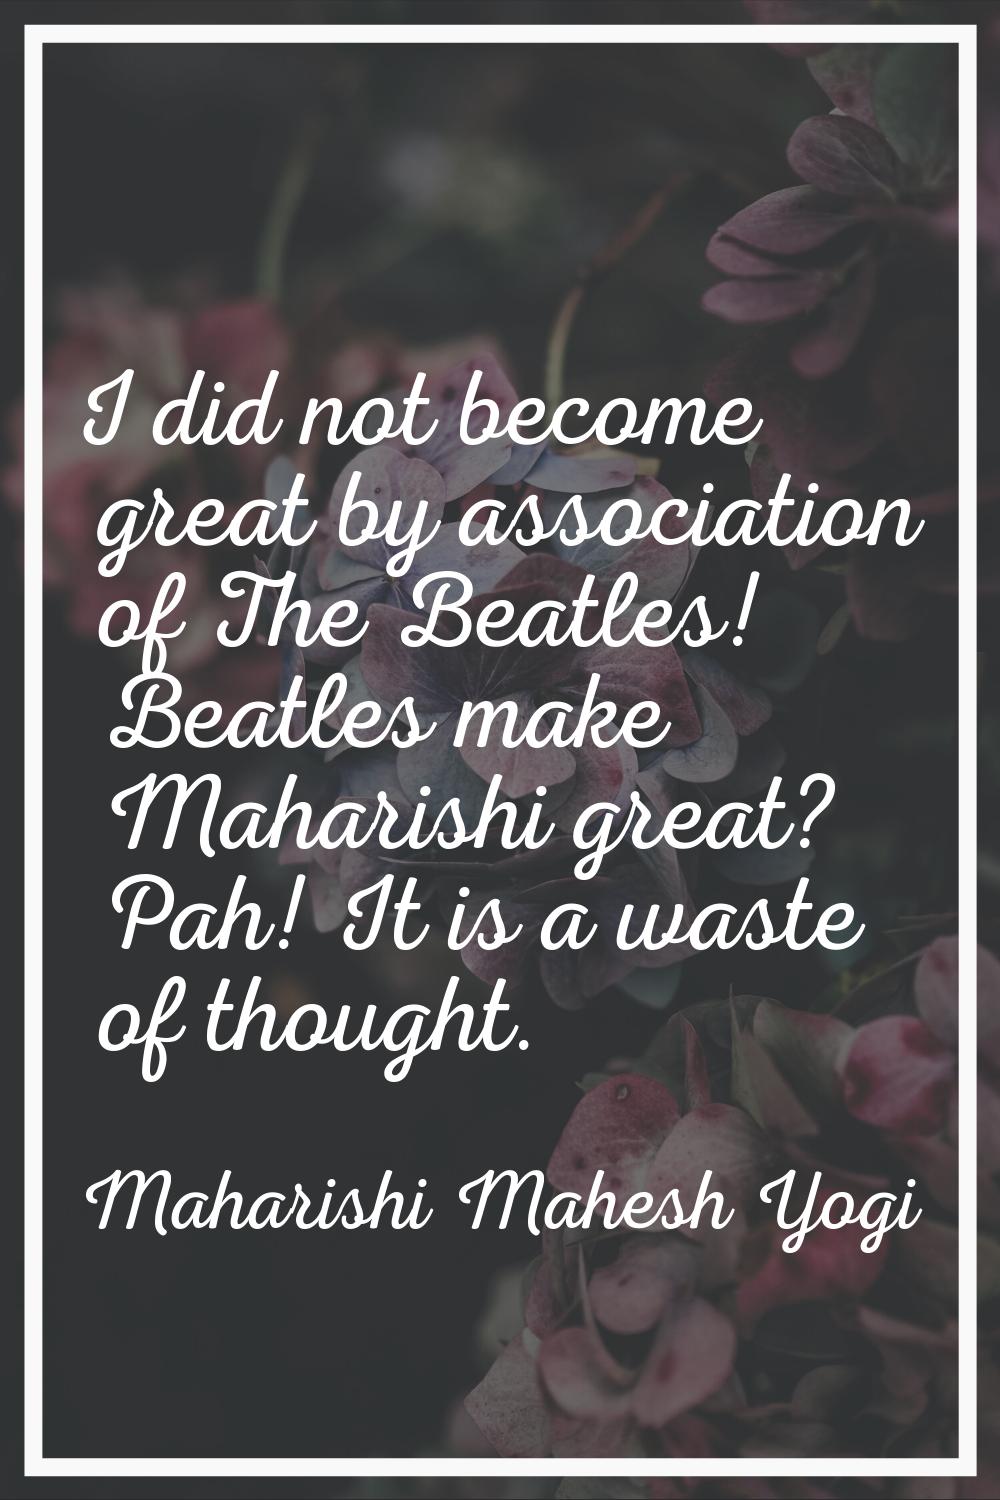 I did not become great by association of The Beatles! Beatles make Maharishi great? Pah! It is a wa